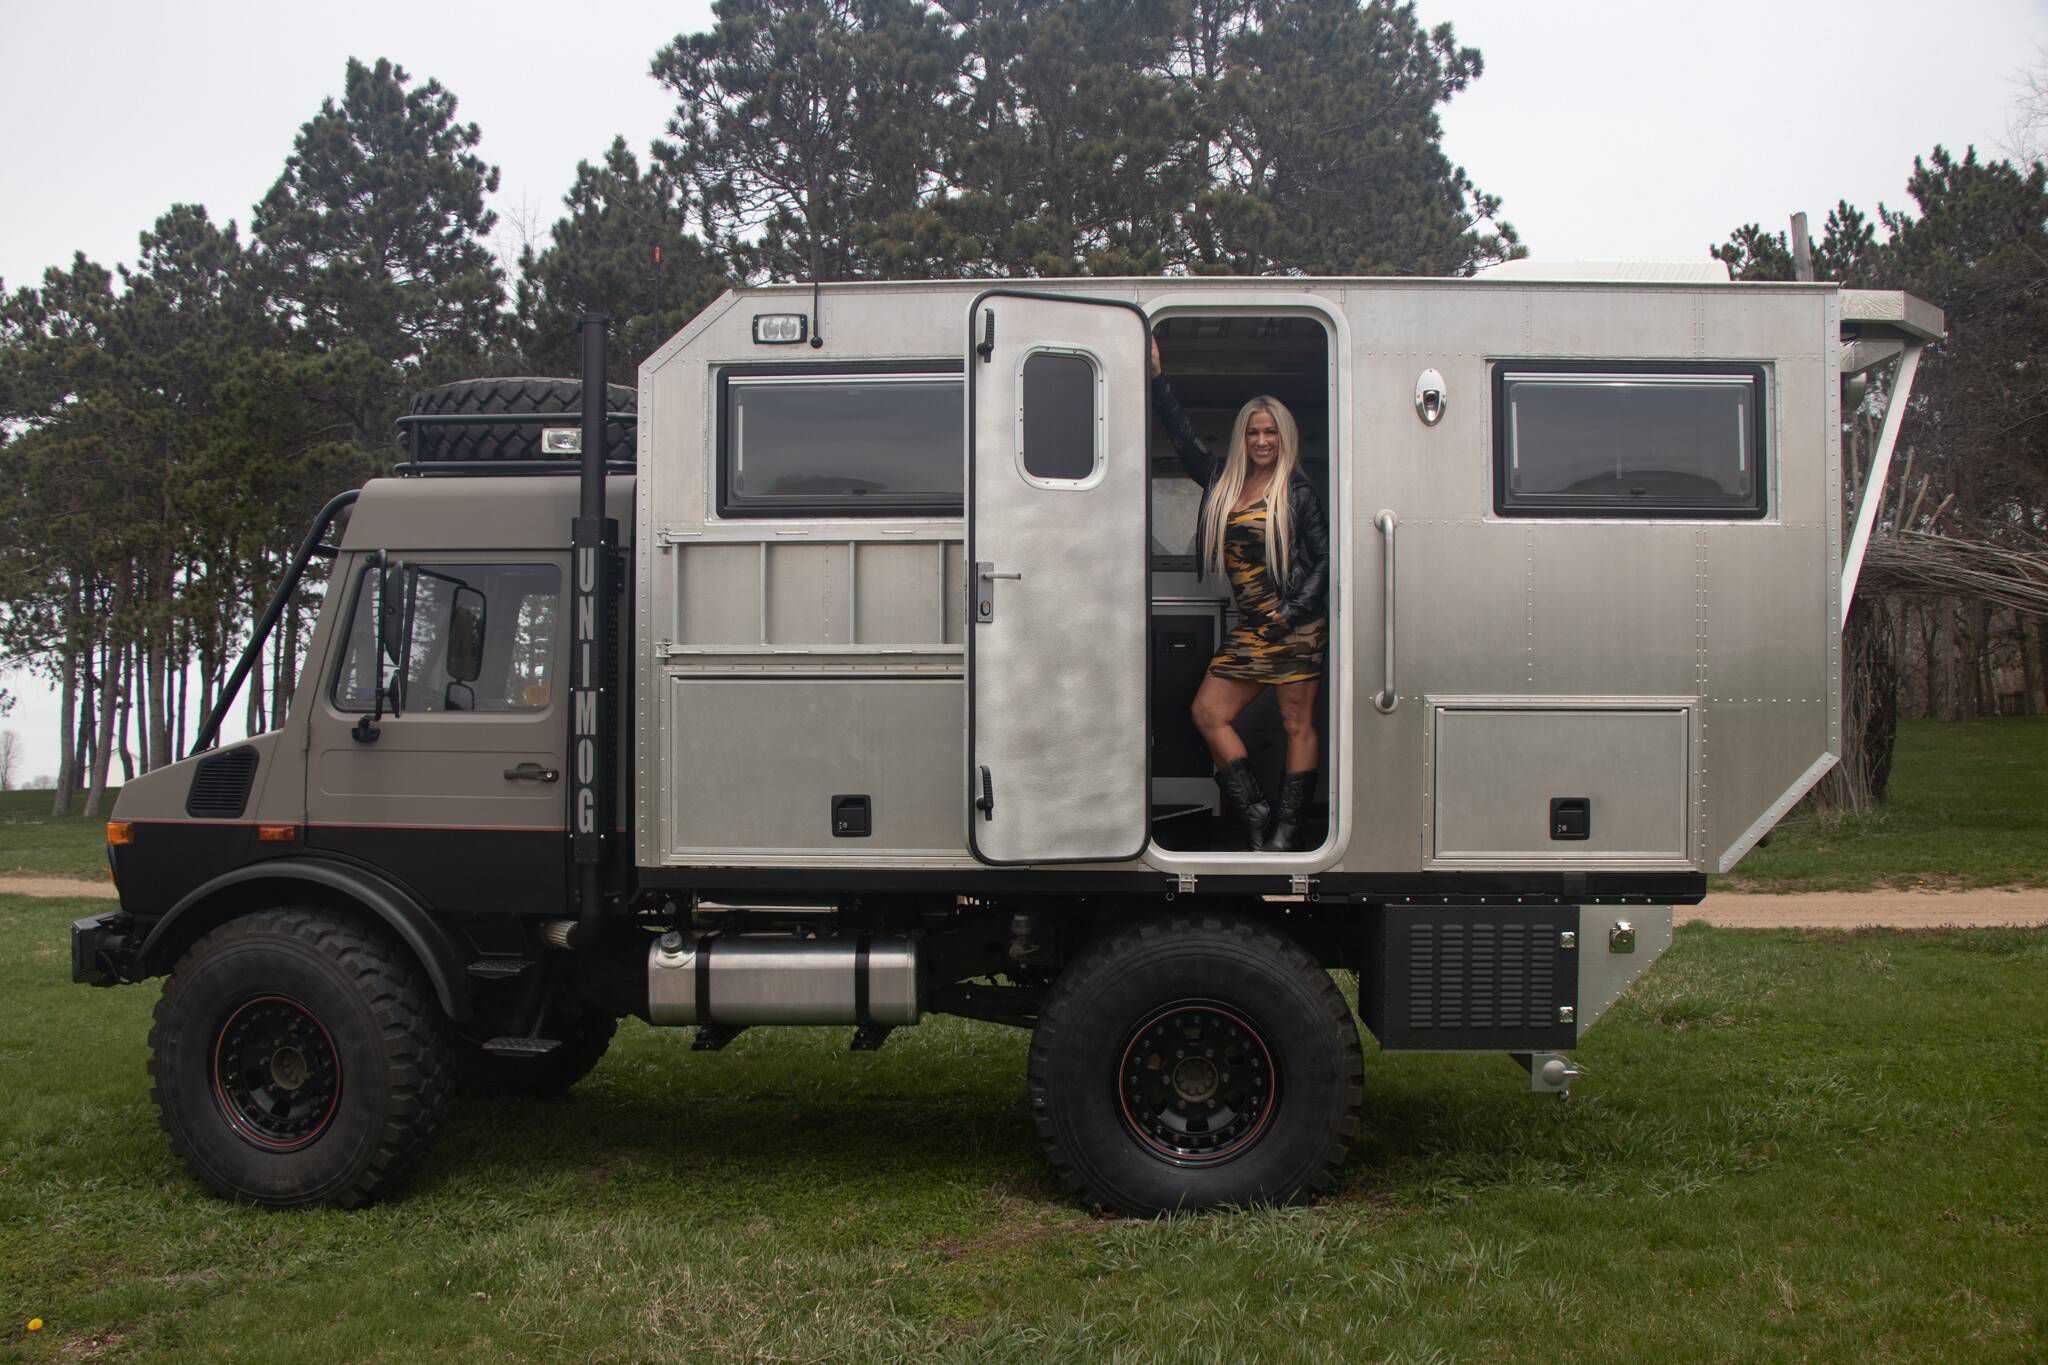 1985 Mercedes-Benz Unimog Is the Ultimate Off-Road Camper, Won't Come ...